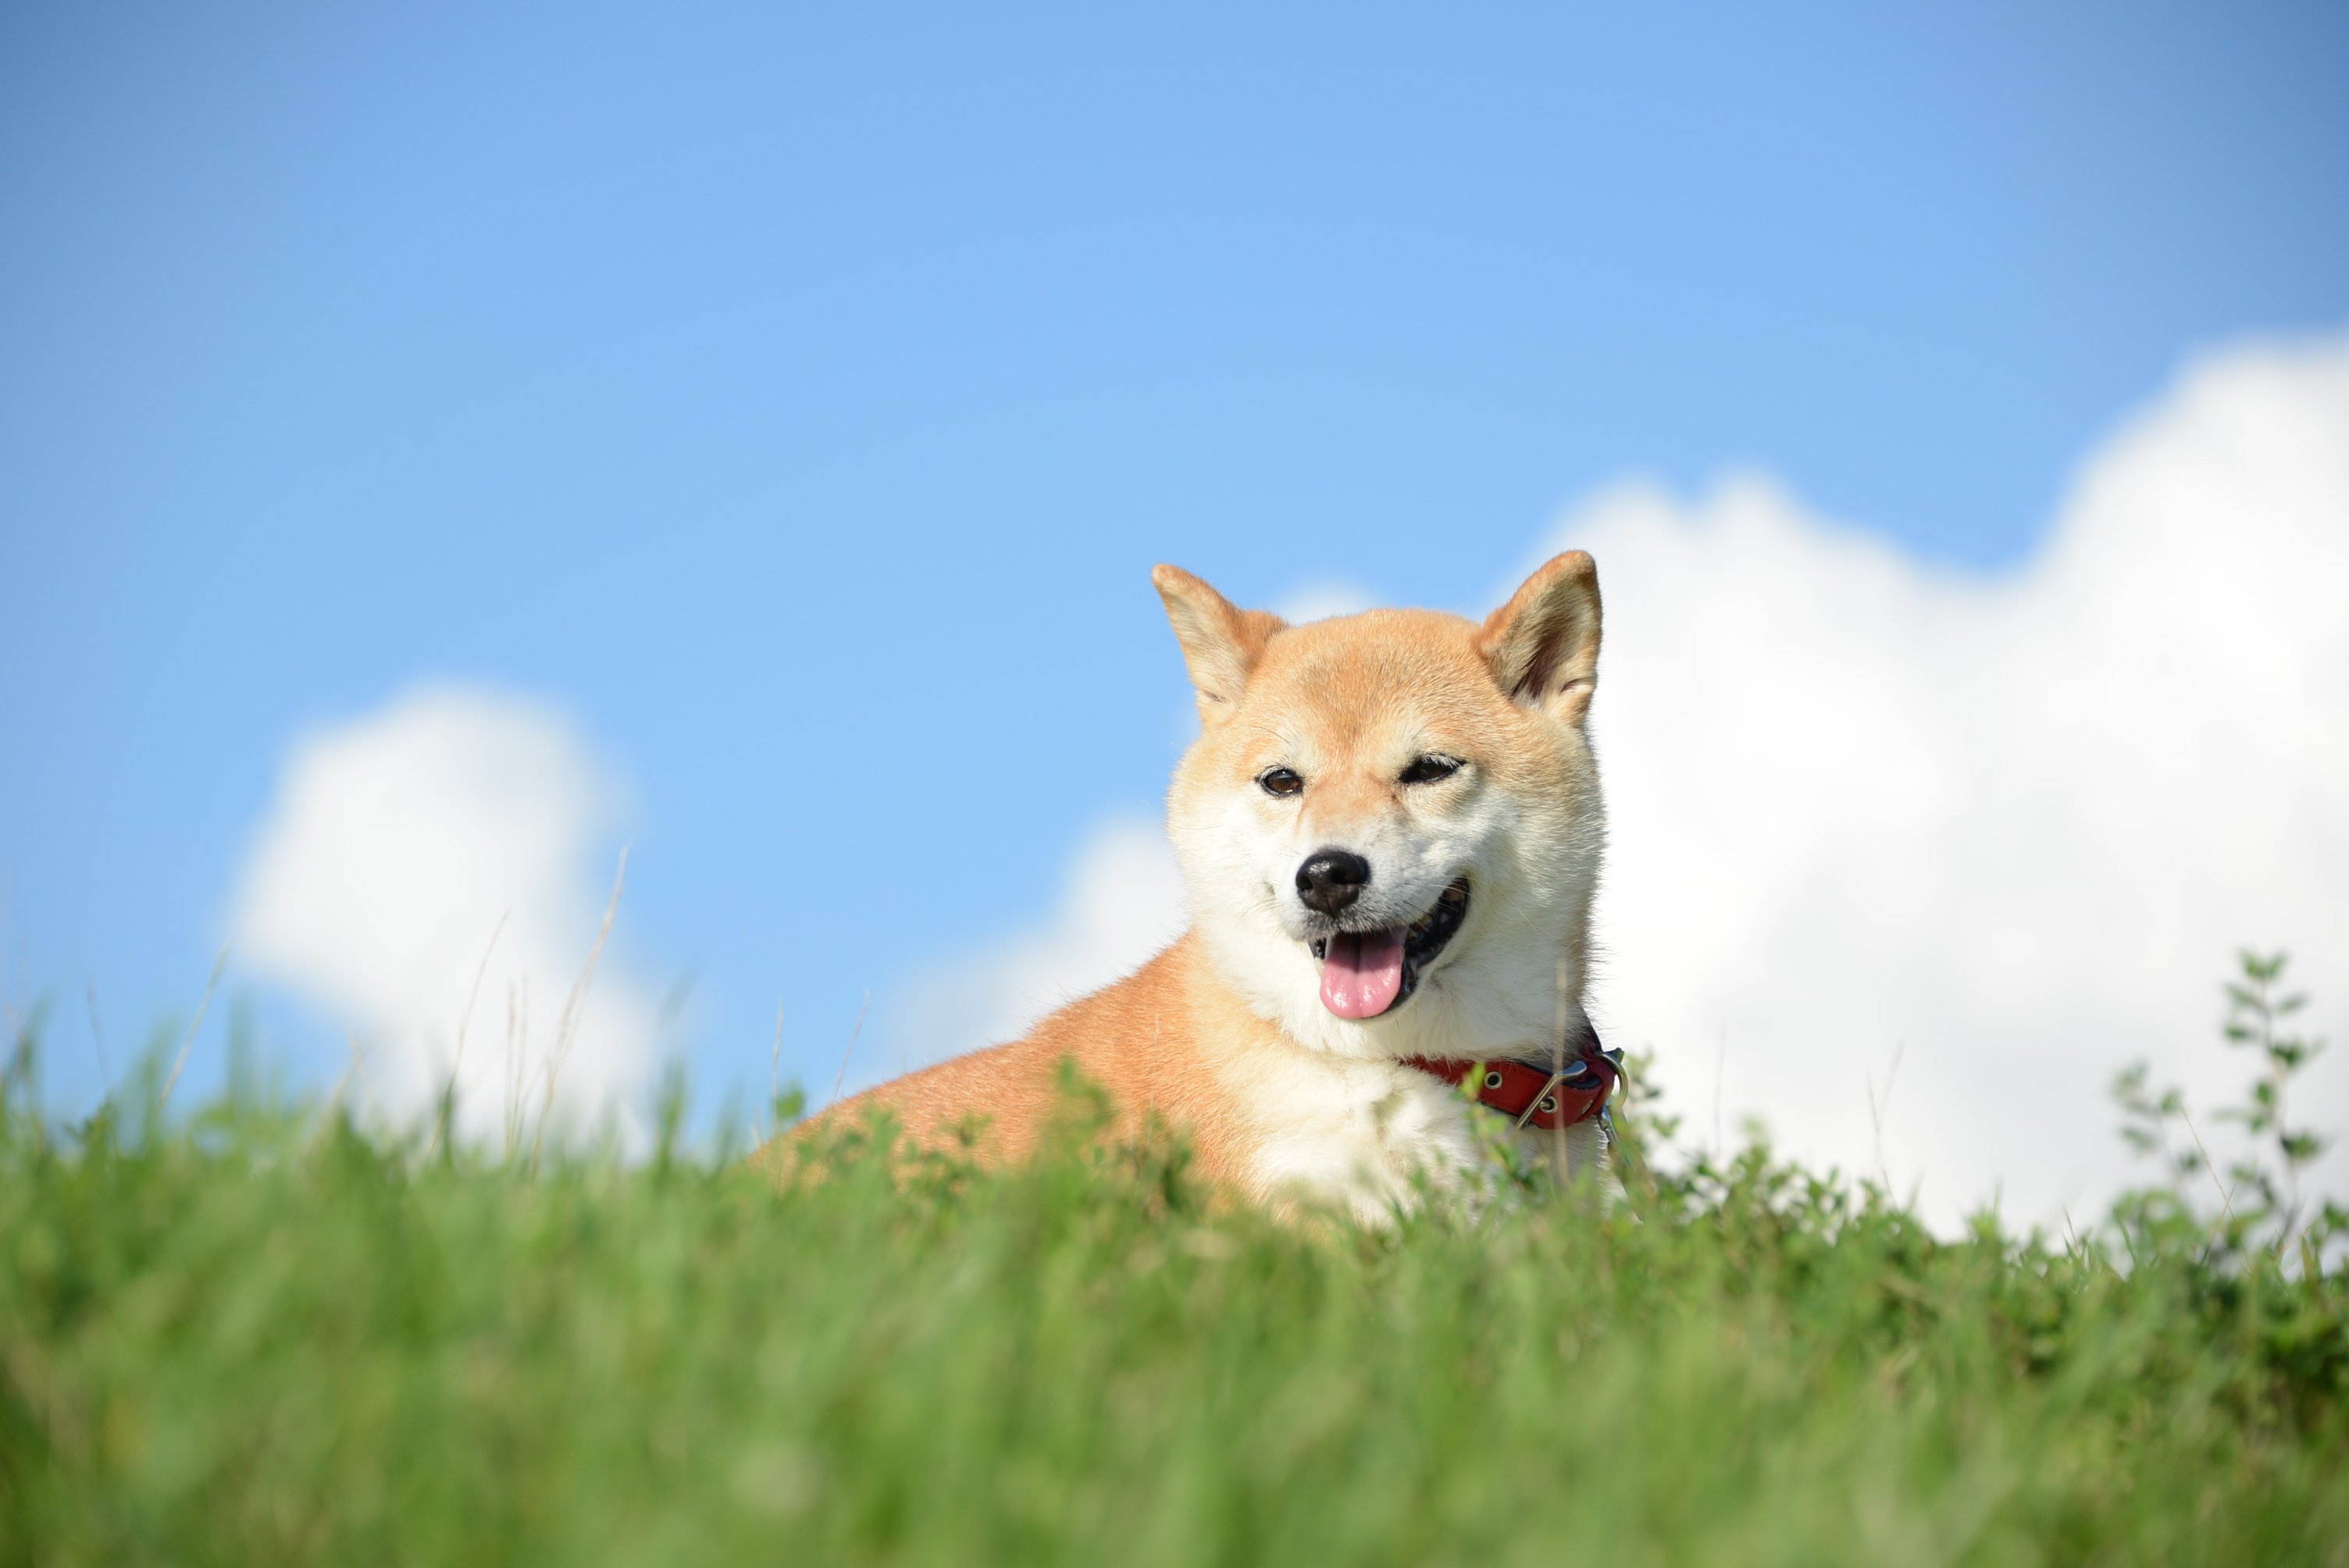 Dogechain (DC) Price Keeps Surging Amid Scam Accusations